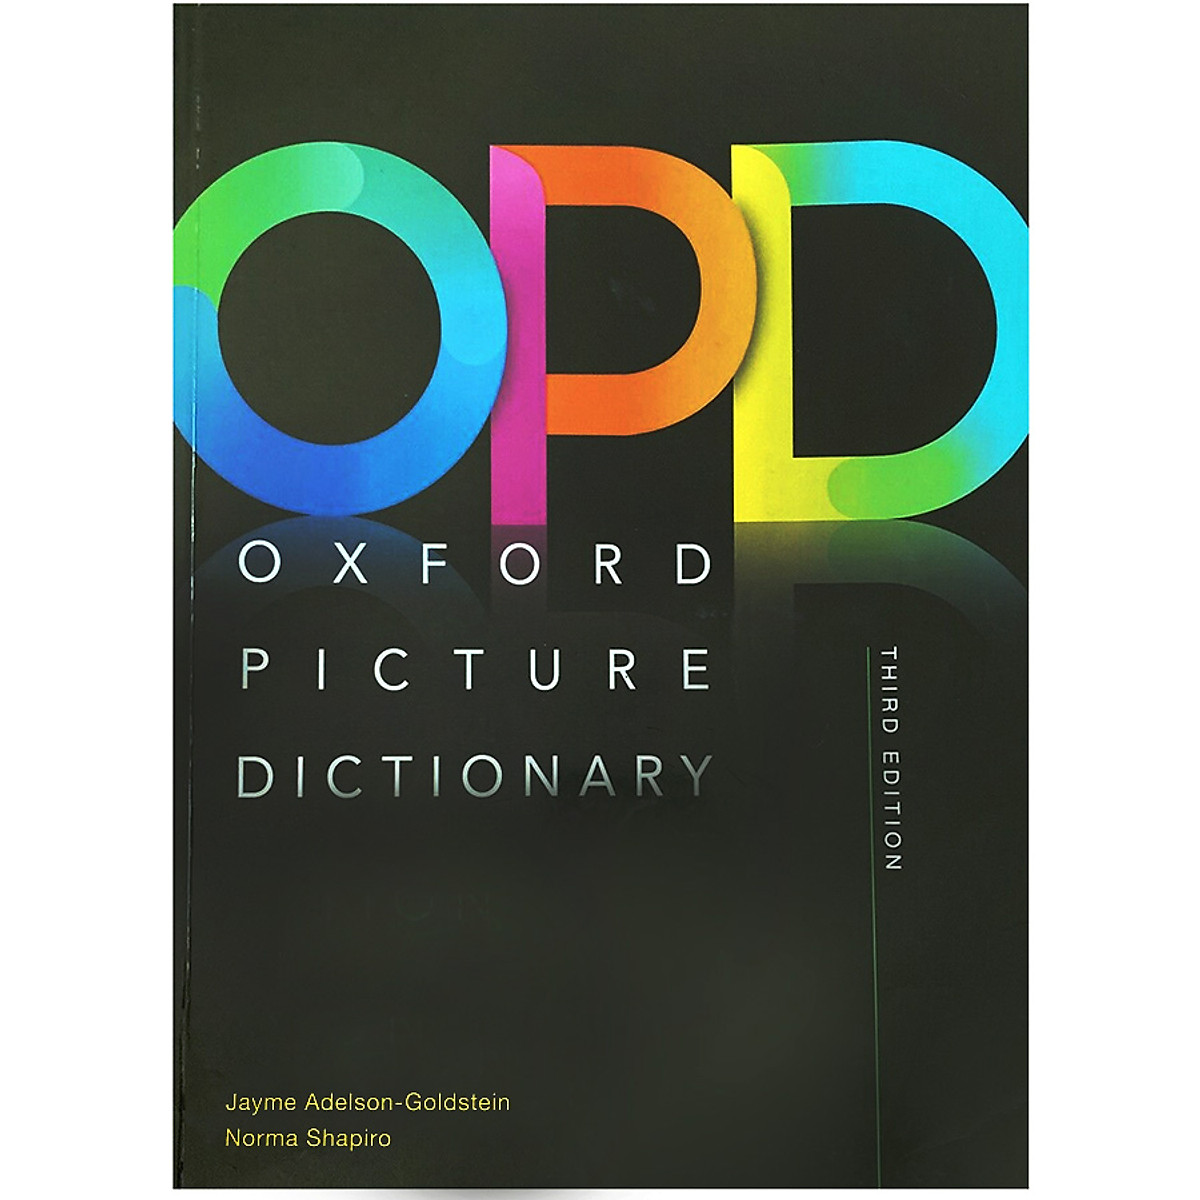 Oxford Picture Dictionary : The Monolingual Dictionary (American English) (Third Edition)